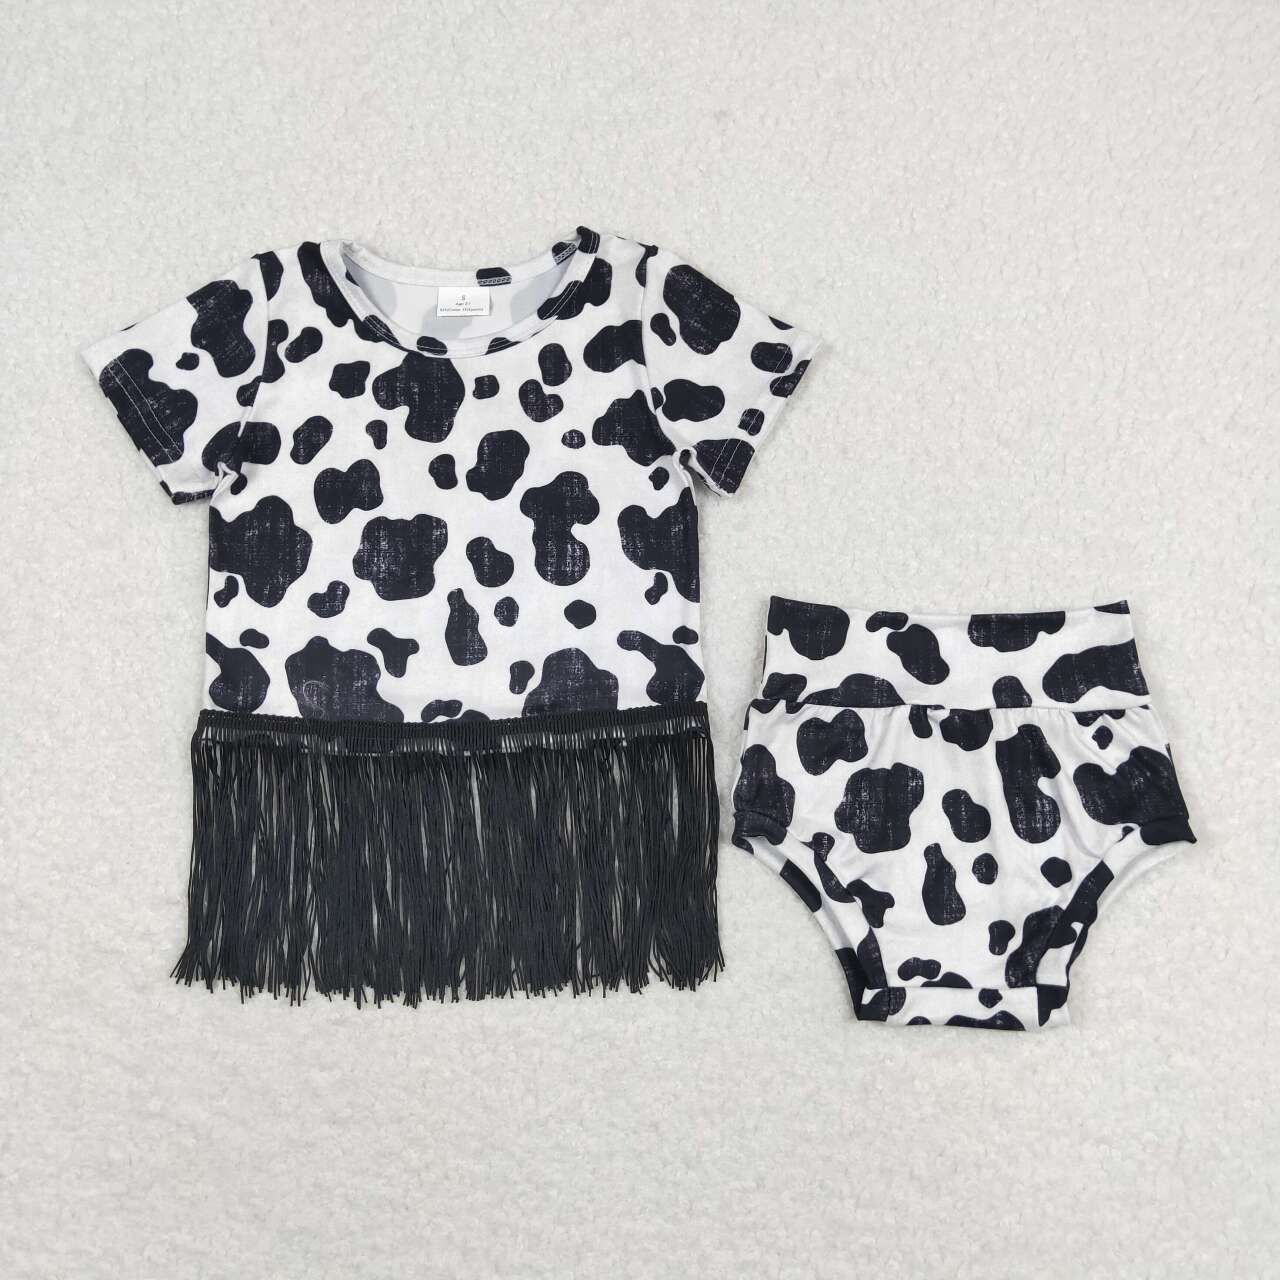 GBO0273 Cow pattern fringed black and white short-sleeved briefs set